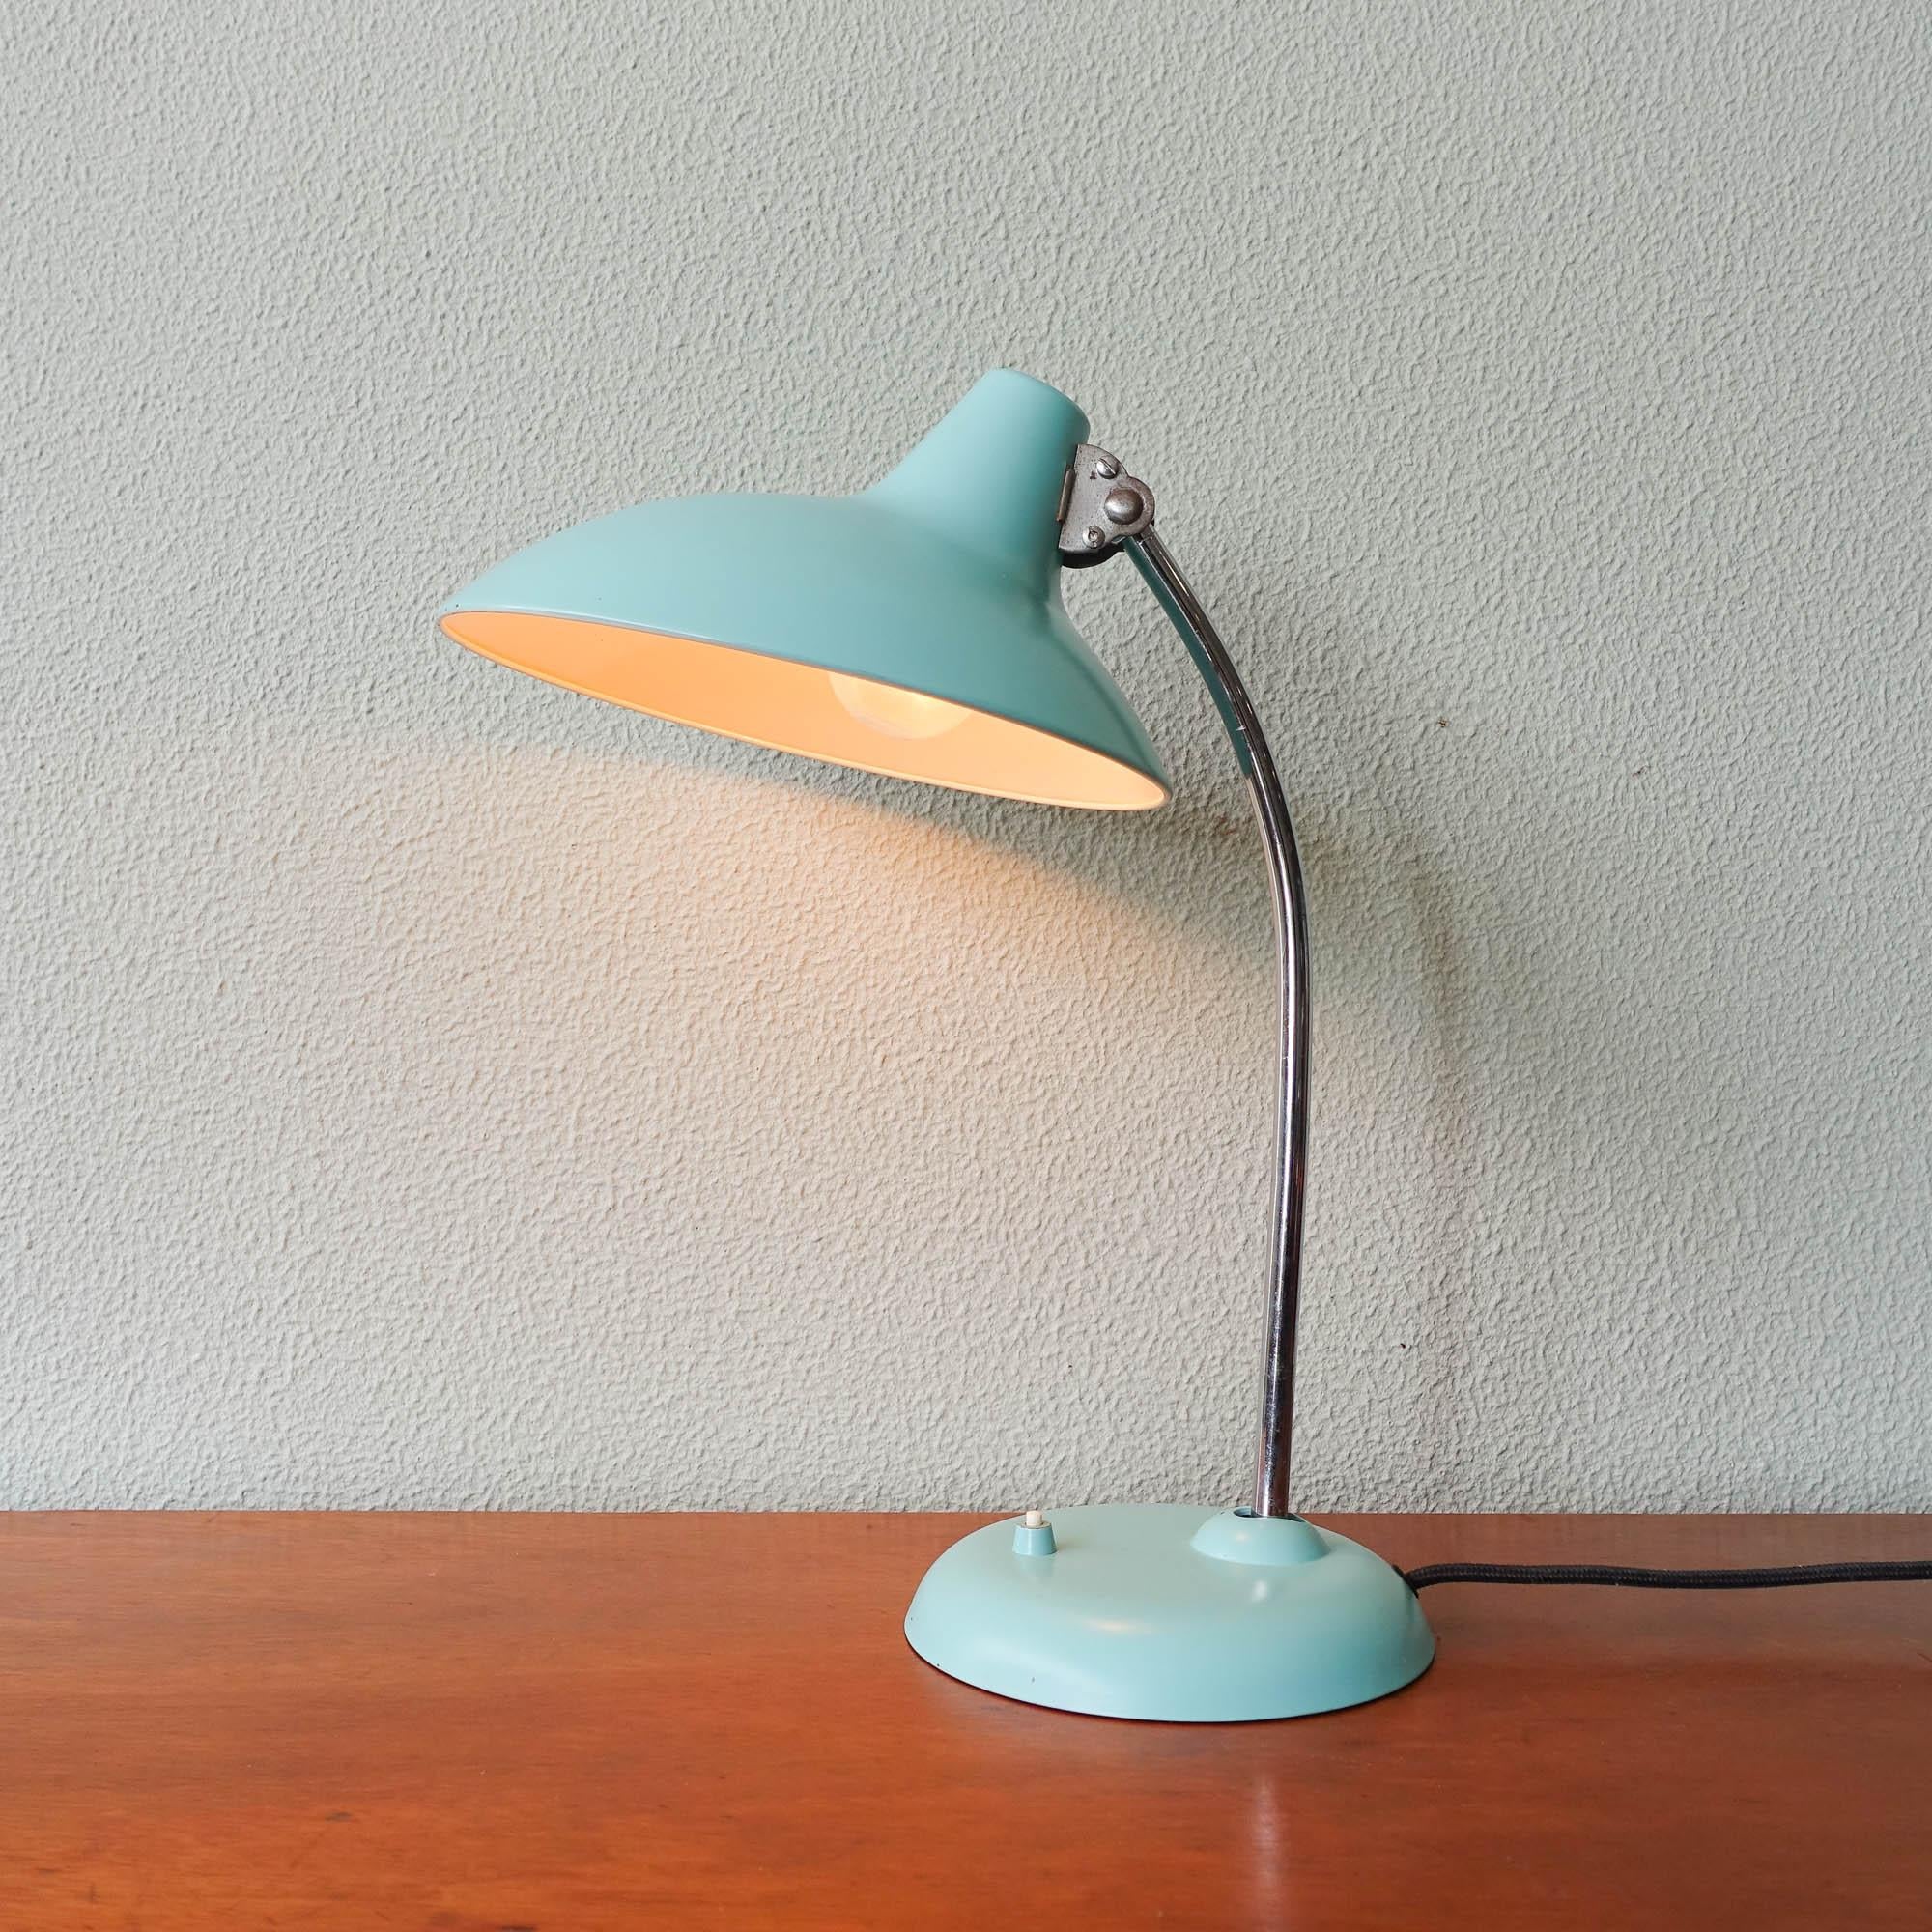 This 6786 model table lamp was designed between 1920-1940 by Christian Dell, and manufactured by Kaiser Idell. It features an adjustable light blue lacquered metal shade, with an adjustable chromed stem. This lamp is in a good vintage condition.